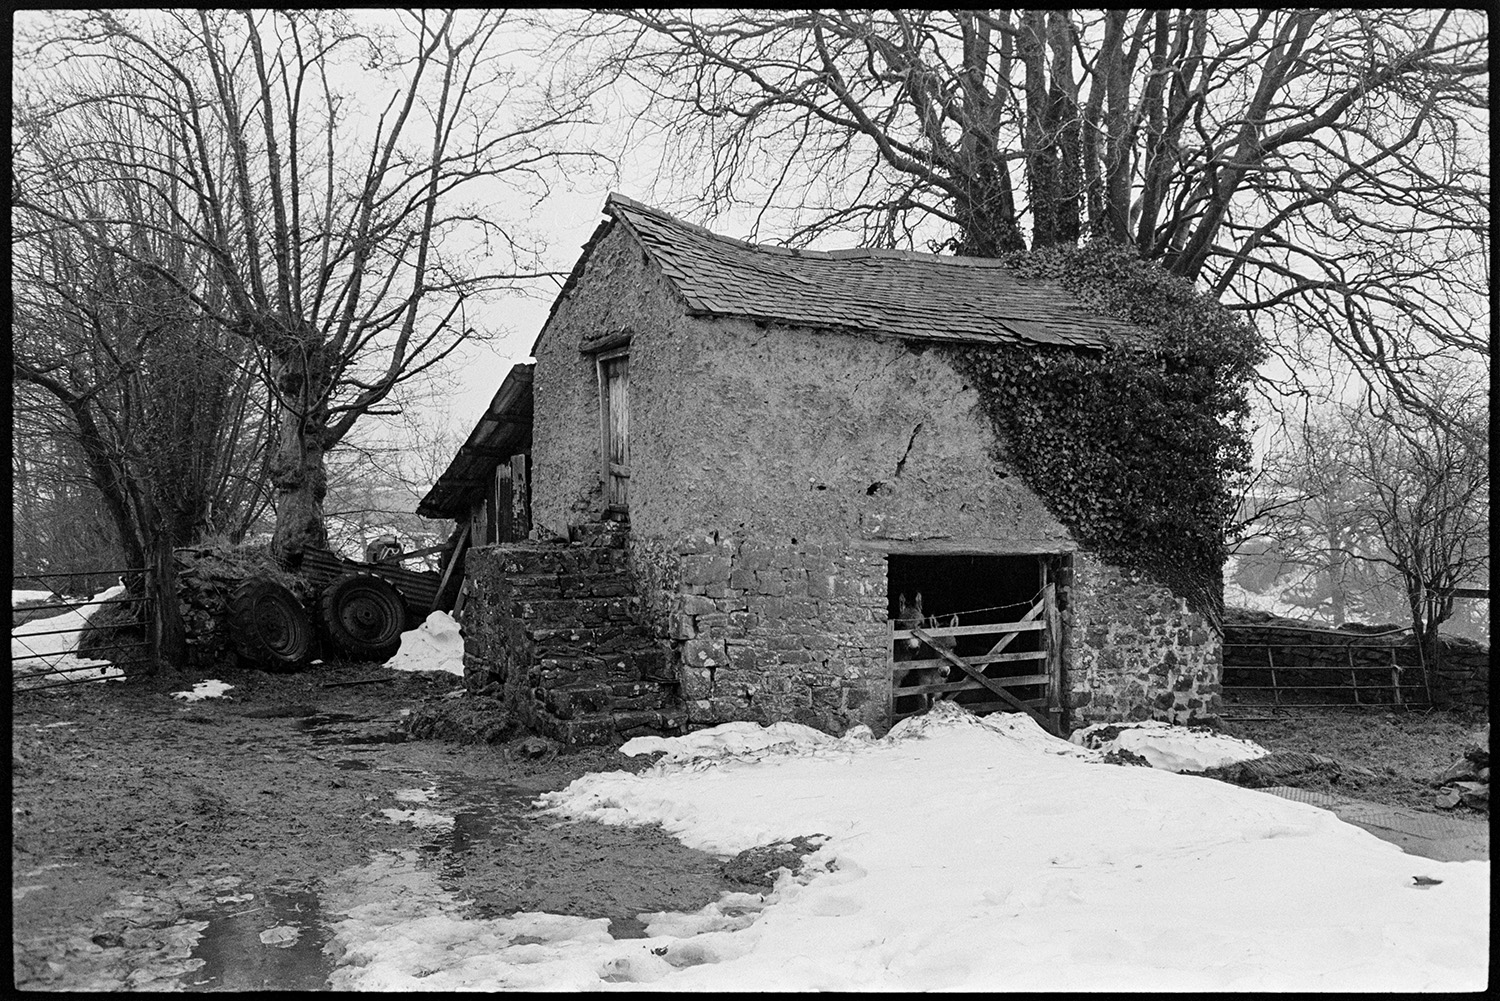 Snow. Slated granary barn.
[Snow on the ground outside a slated barn with steps and donkeys in the doorway at Colehouse, Riddlecombe.]